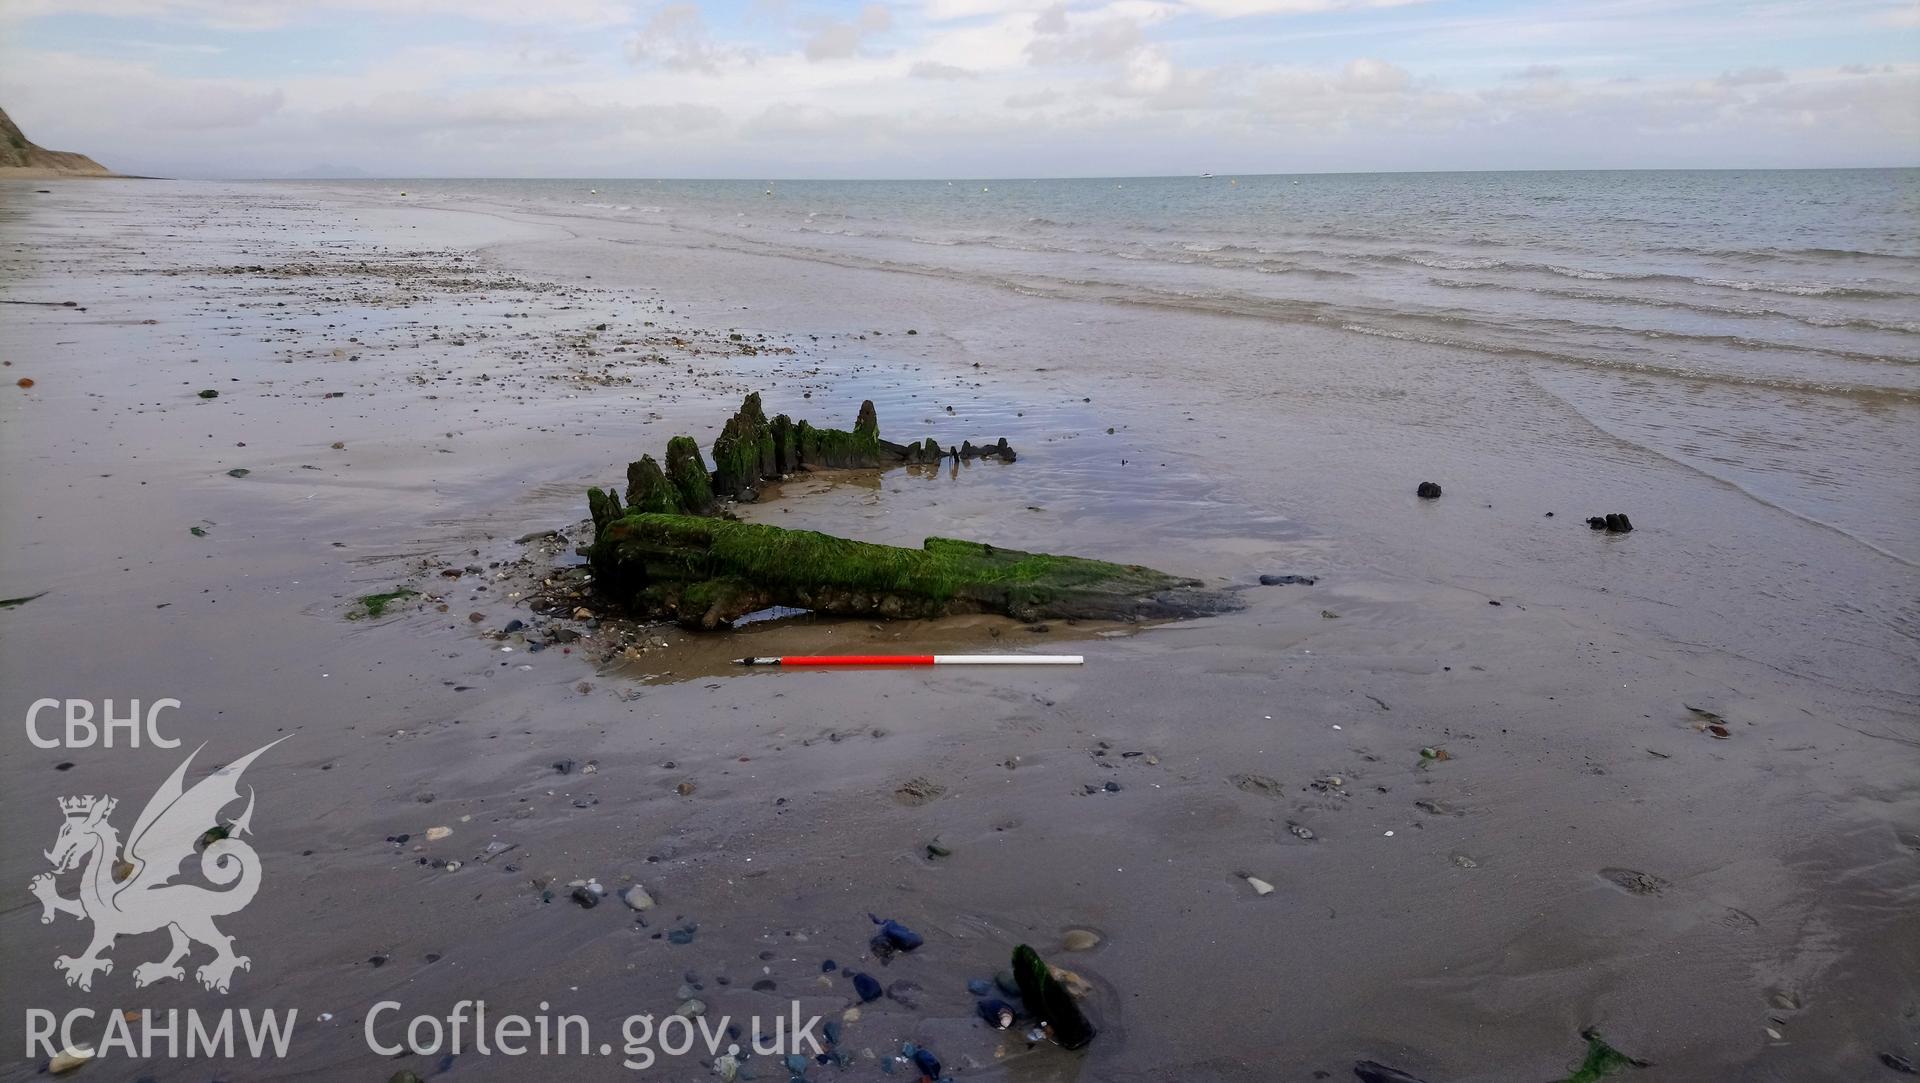 Photographic survey of newly-identified wreck on The Warren beach, Abersoch. Recorded with GNSS and photogrammetry for the CHERISH Project. ? Crown: CHERISH PROJECT 2018. Produced with EU funds through the Ireland Wales Co-operation Programme 2014-2020. All material made freely available through the Open Government Licence.